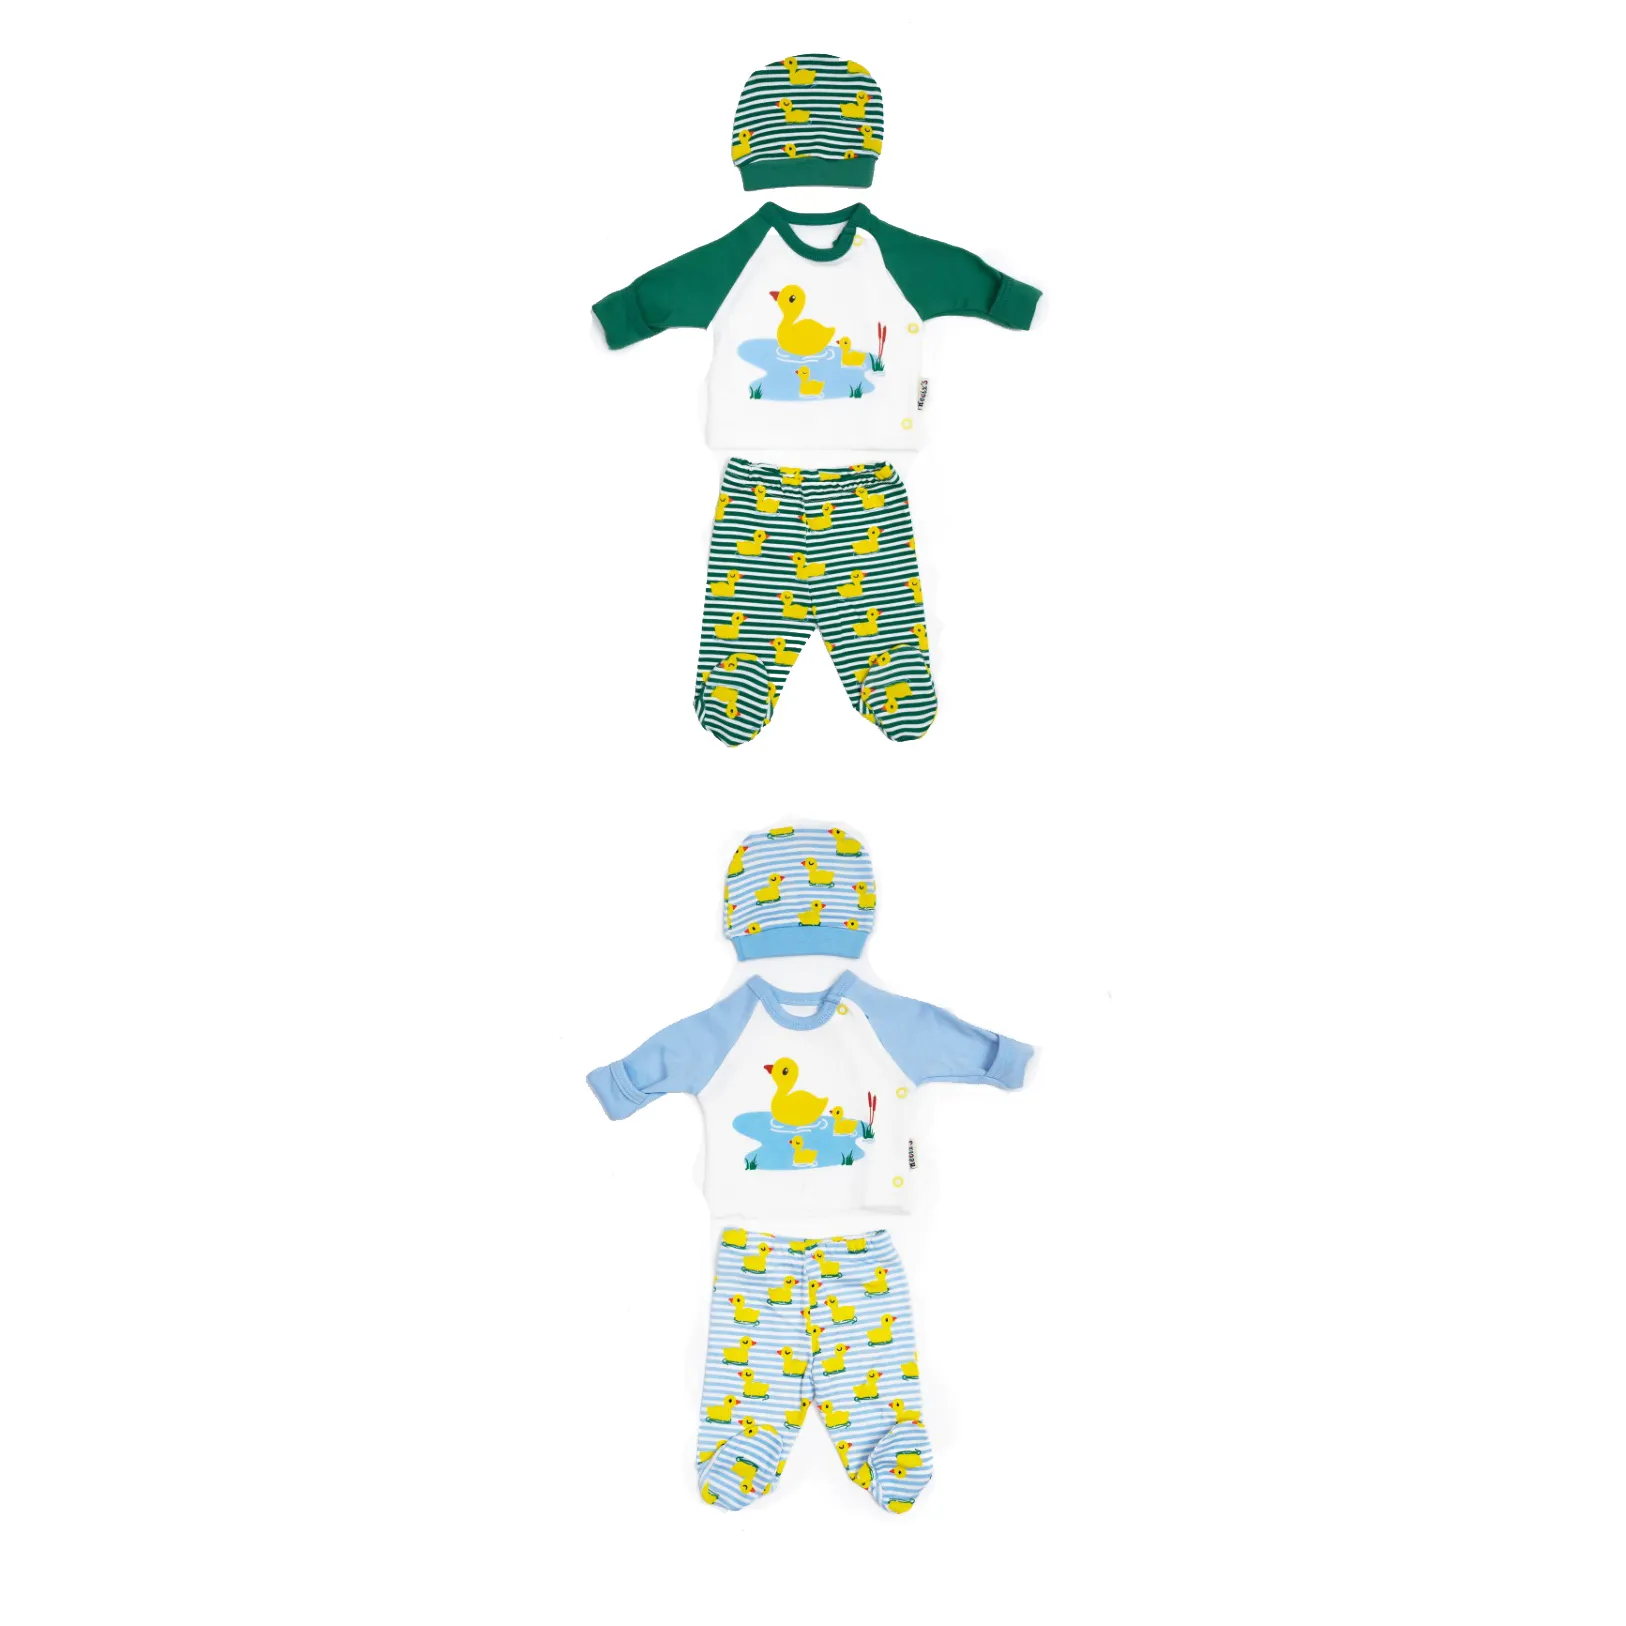 Hot Sale ! Chicks Premature Baby Boys' 3 Pcs Set Spring Soft Cotton Baby Clothes By Necix's Brand